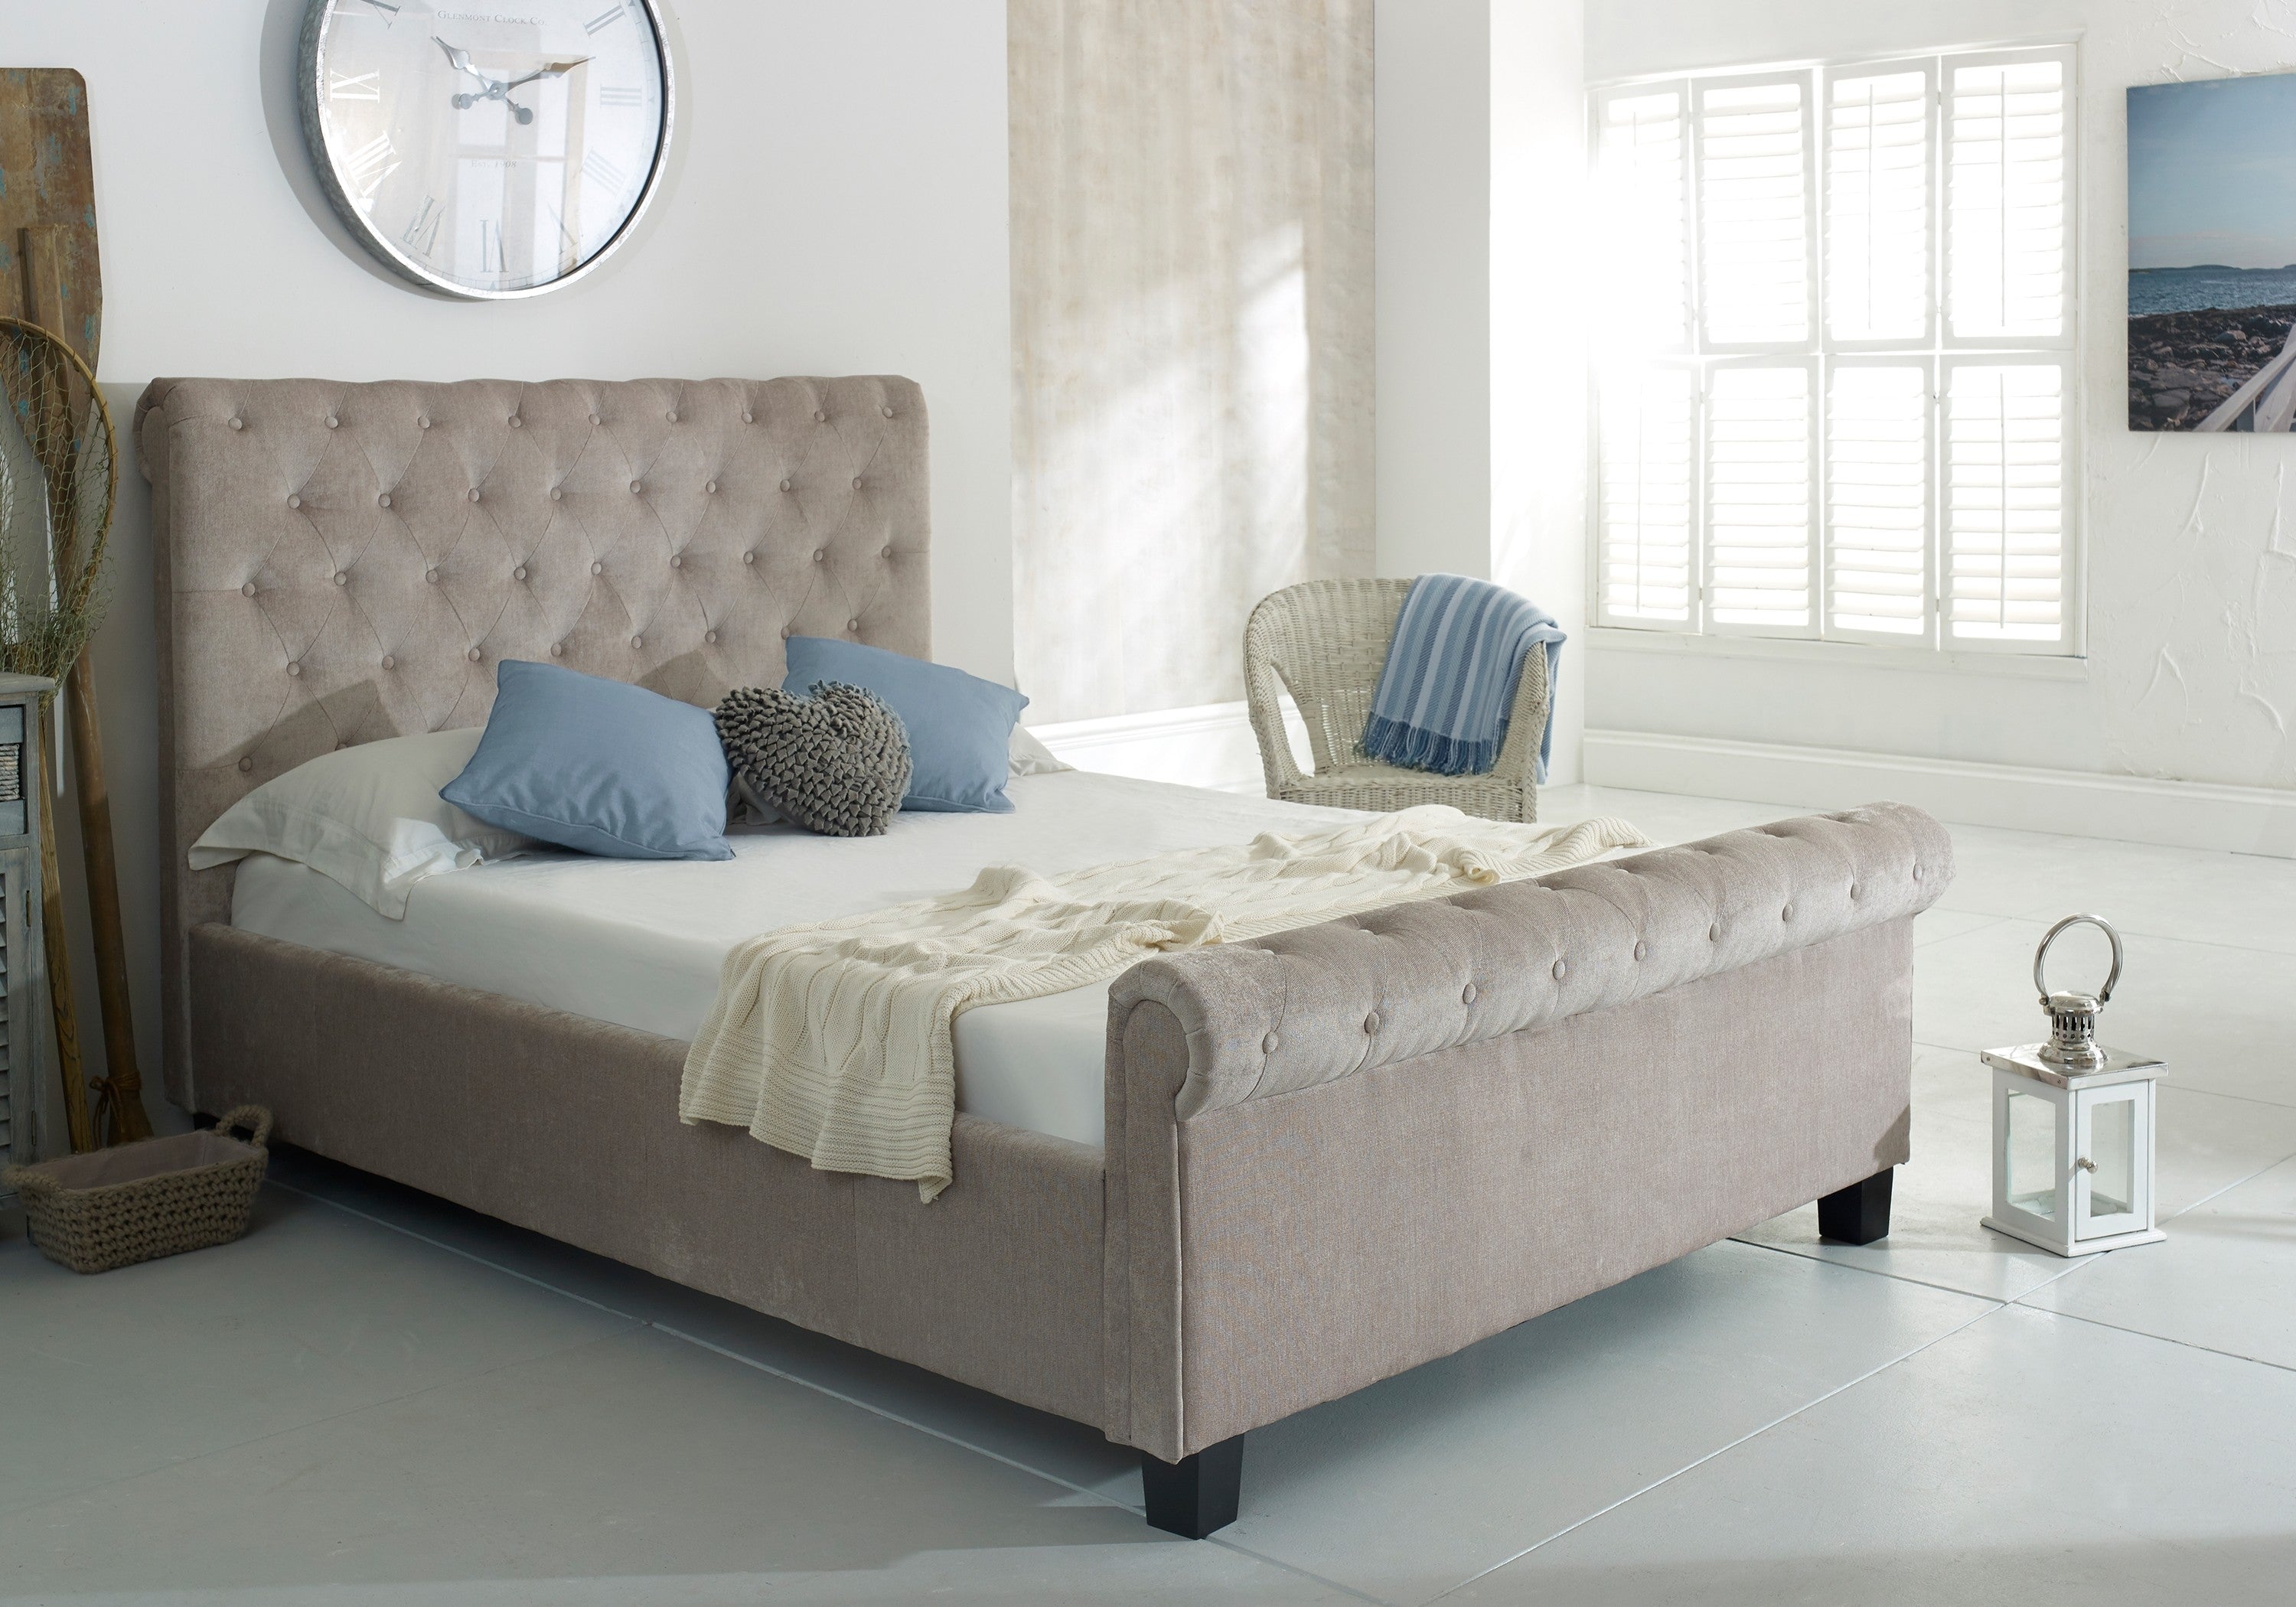 Libbie Fabric Bed Better Bed Company Fabric Beds Sale Now On